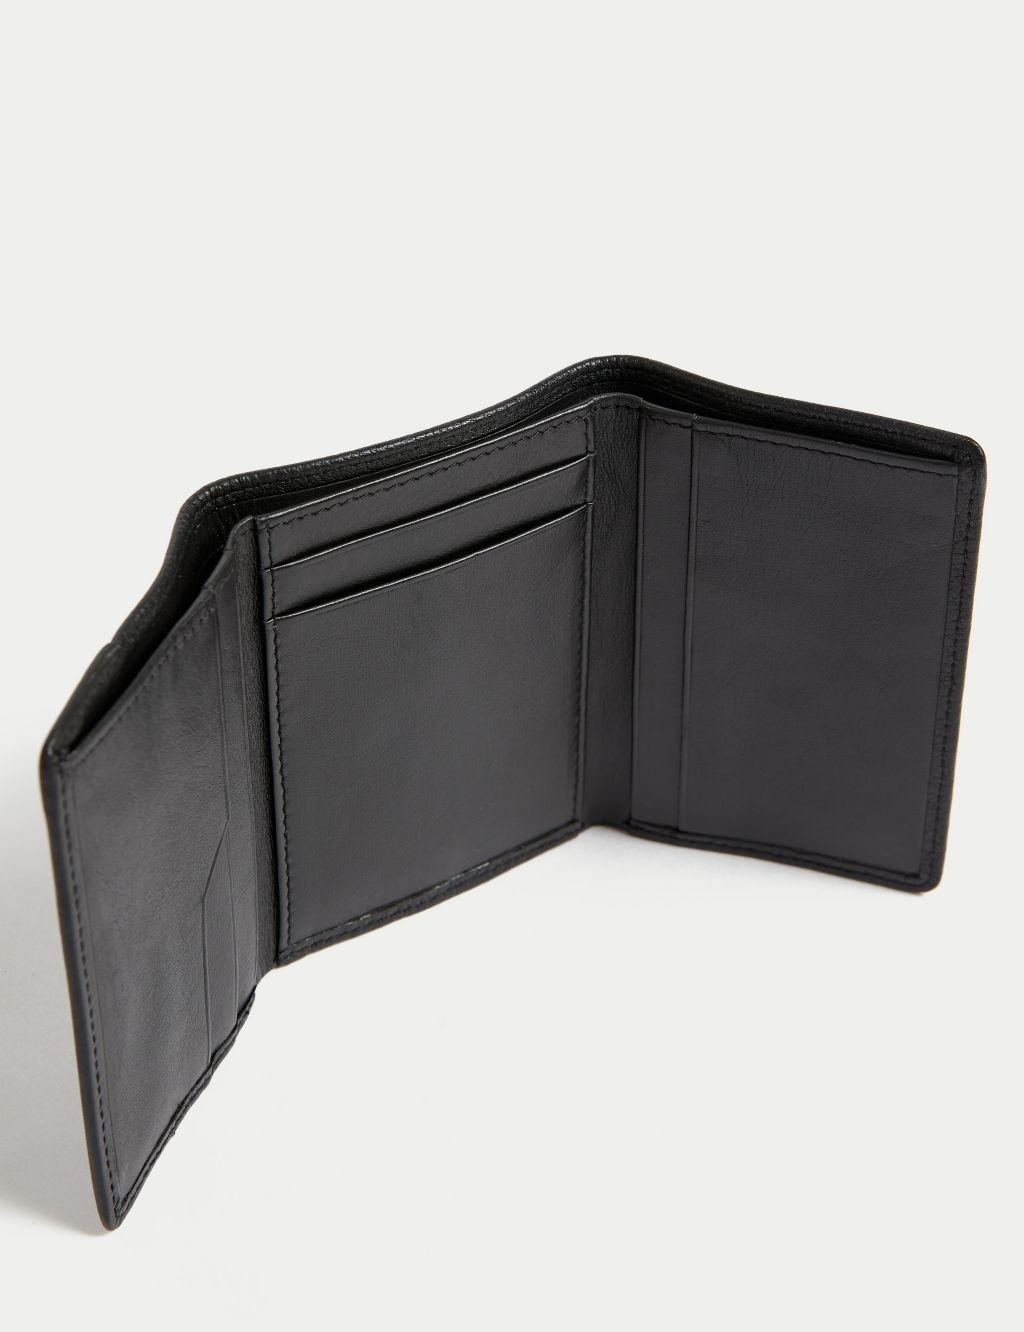 Leather Tri-fold Wallet image 3